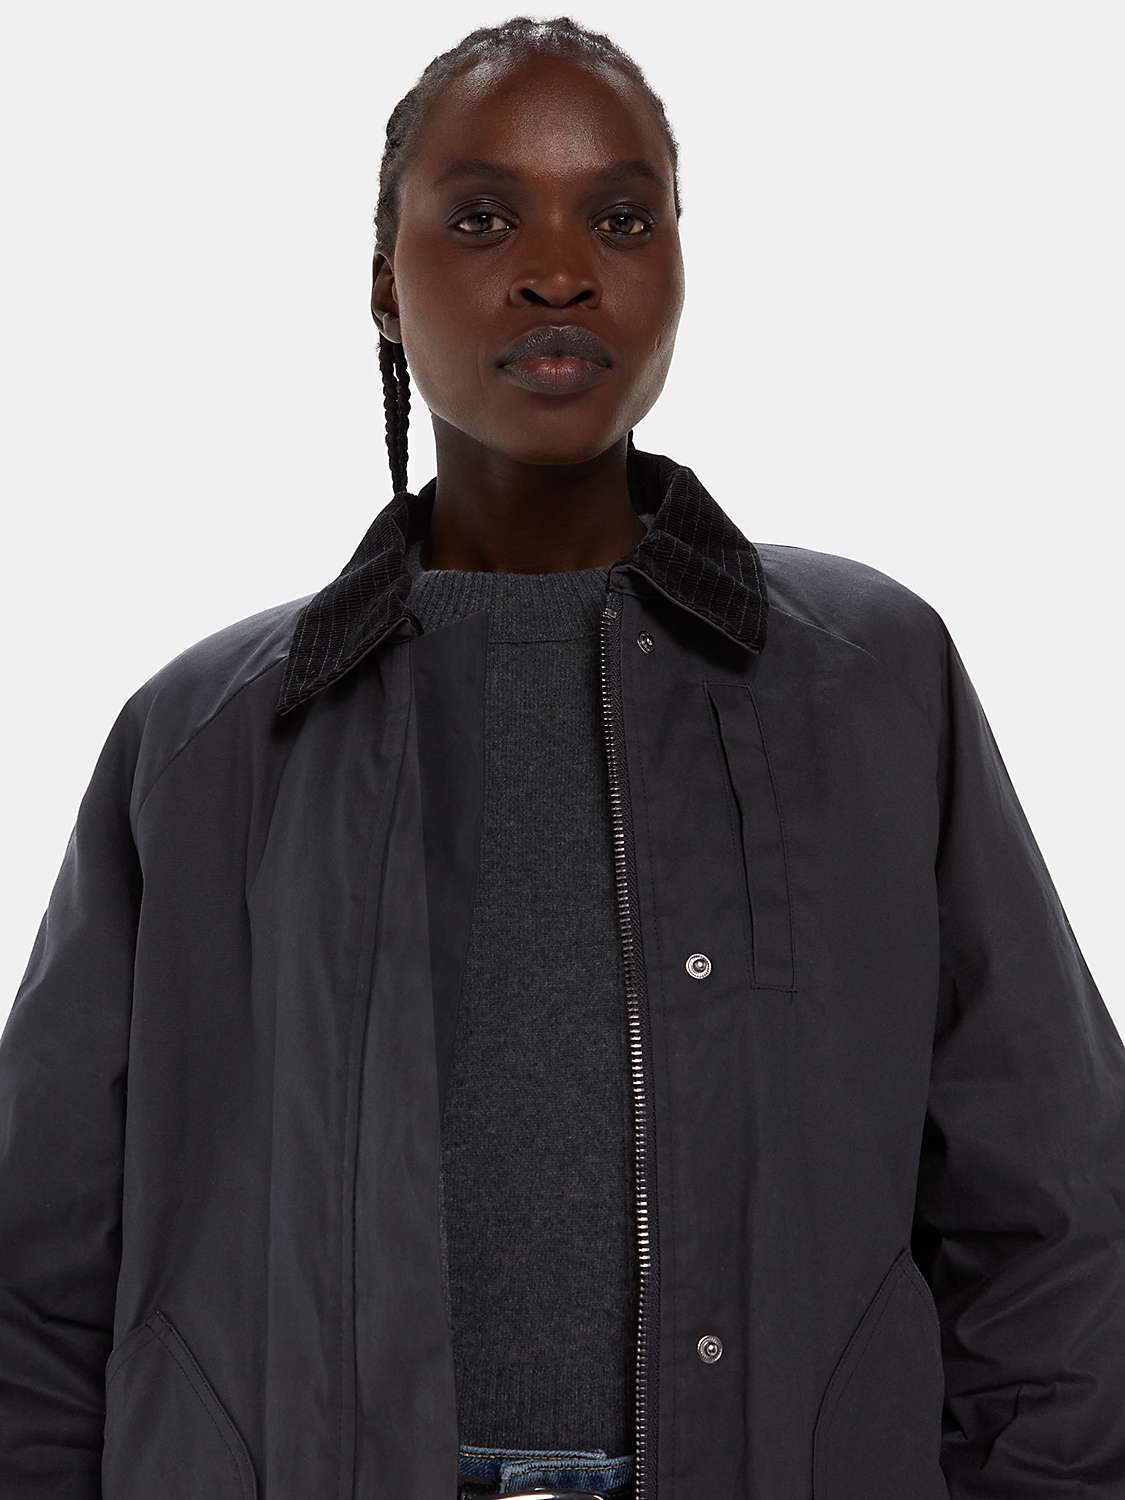 Buy Whistles Fern Waxed Cotton Jacket, Black Online at johnlewis.com